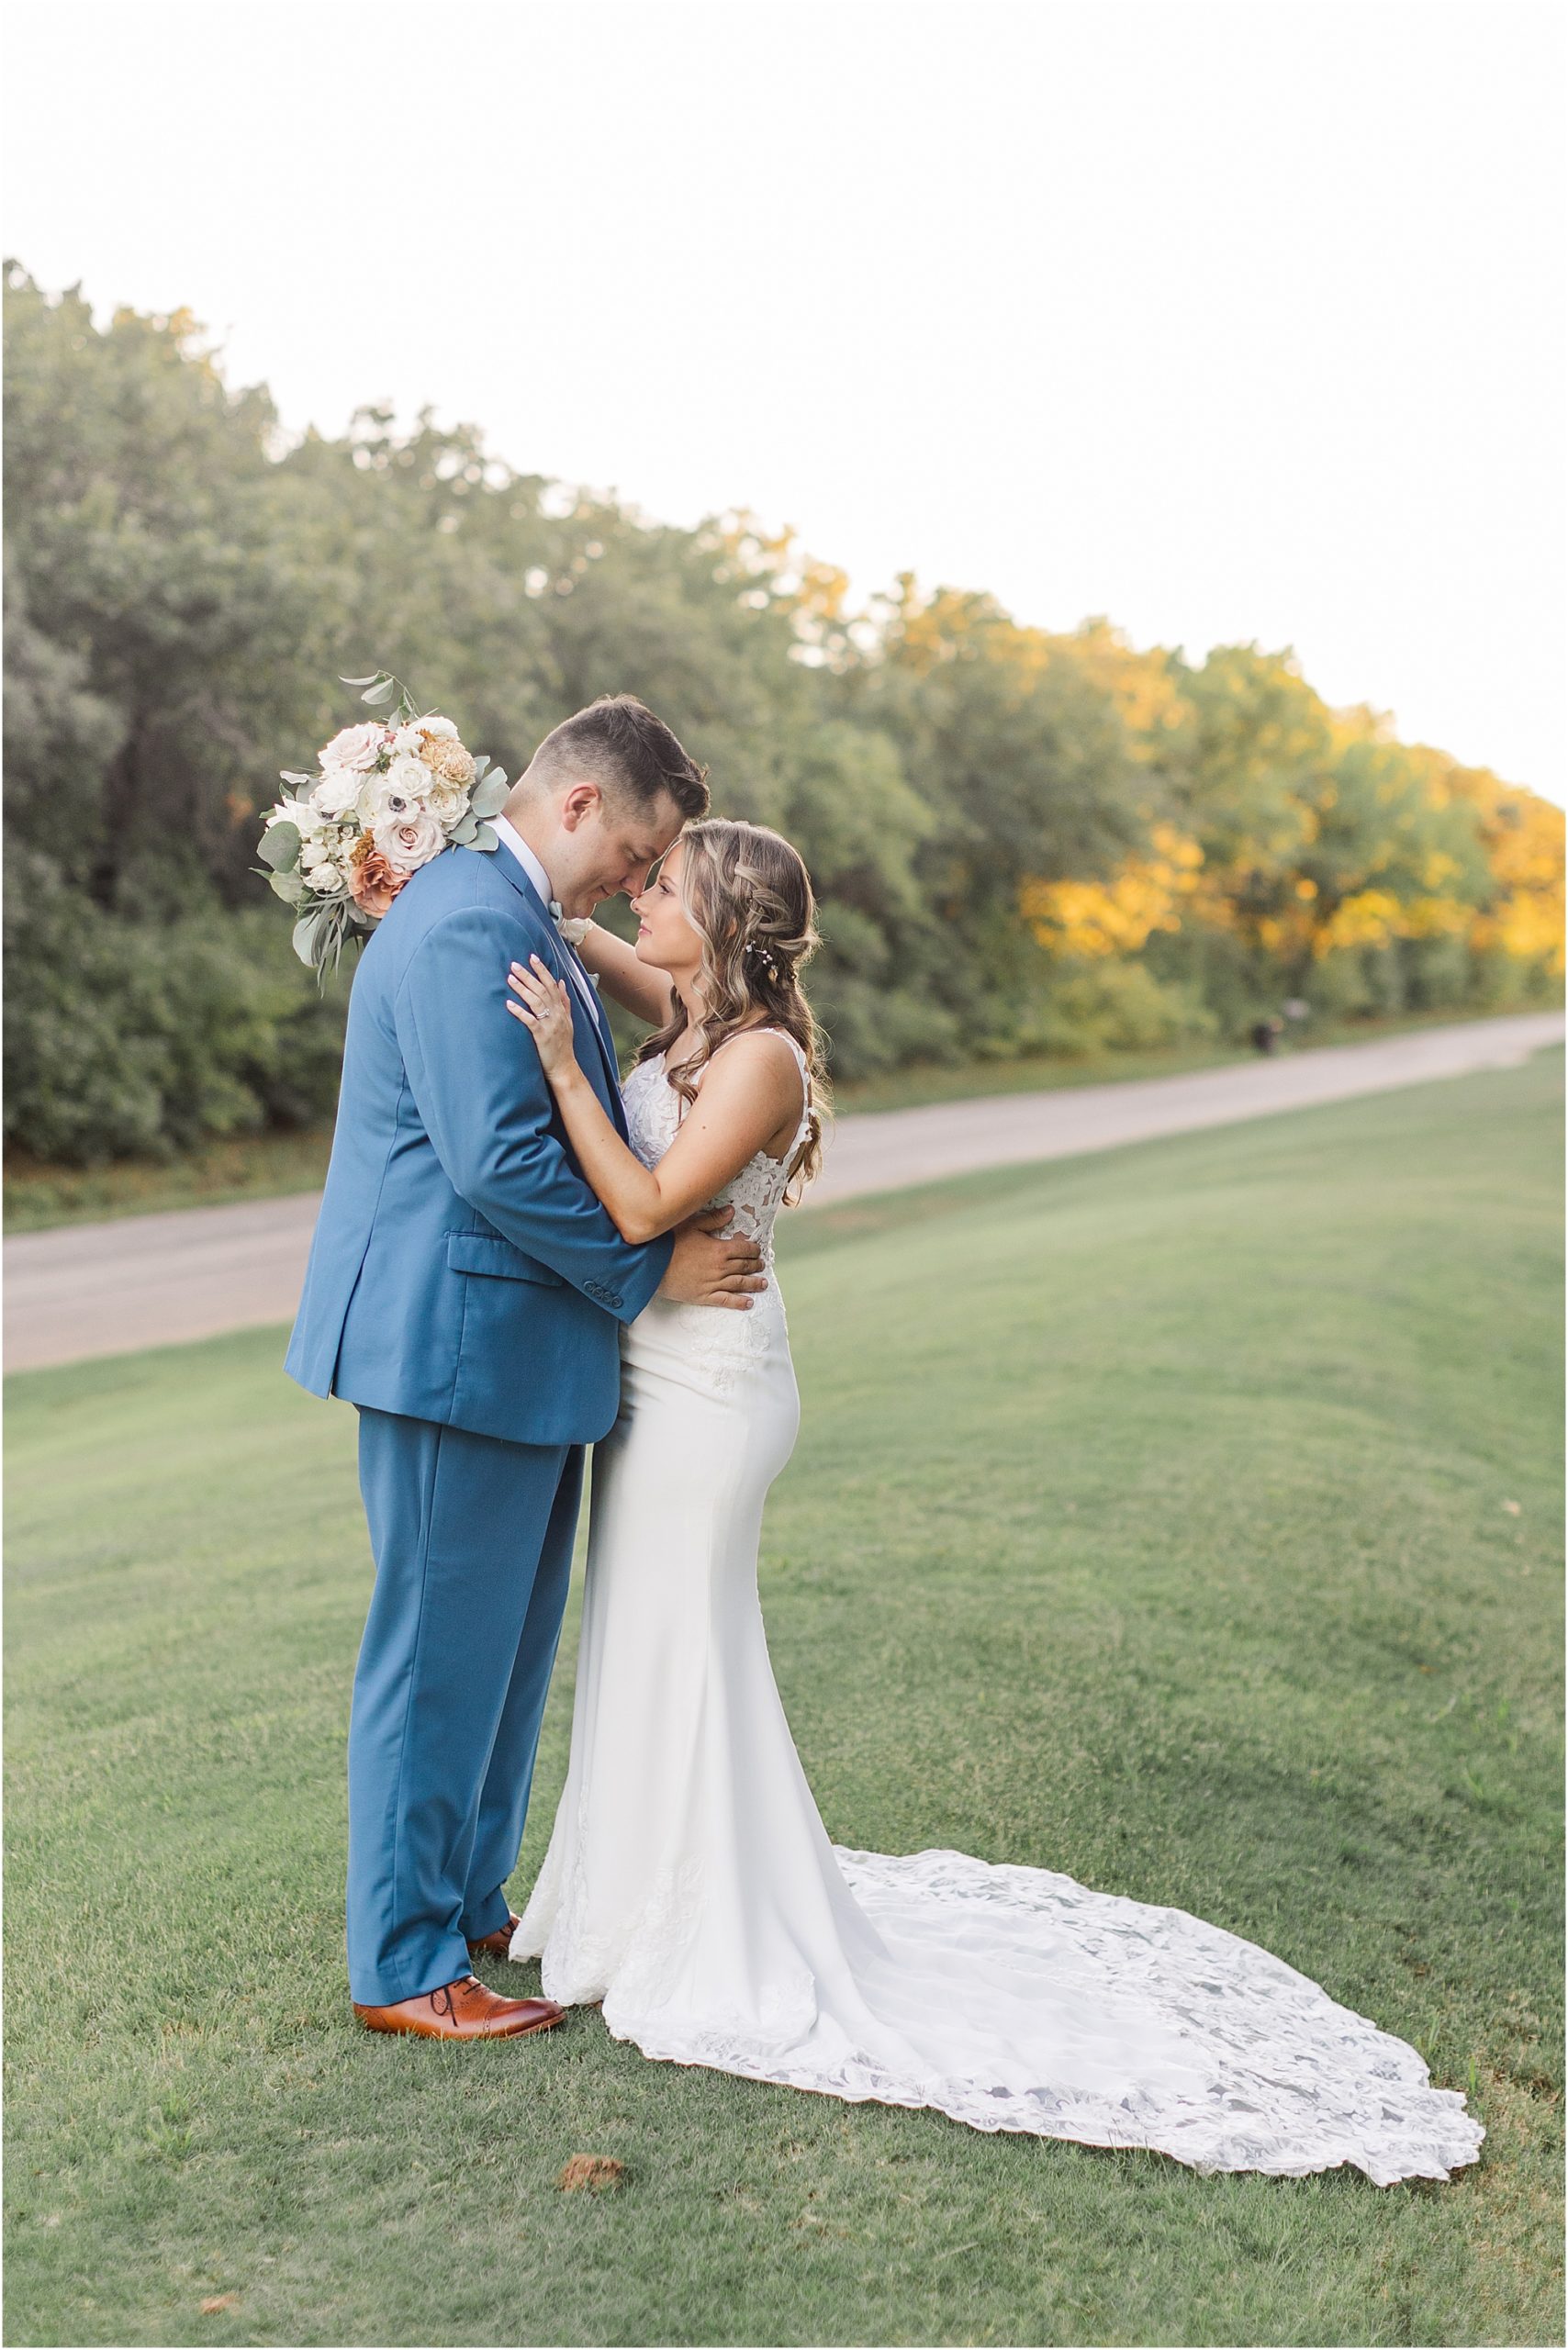 A couple sharing an intimate moment at their wedding during golden hour in the woods of Luther, Oklahoma.